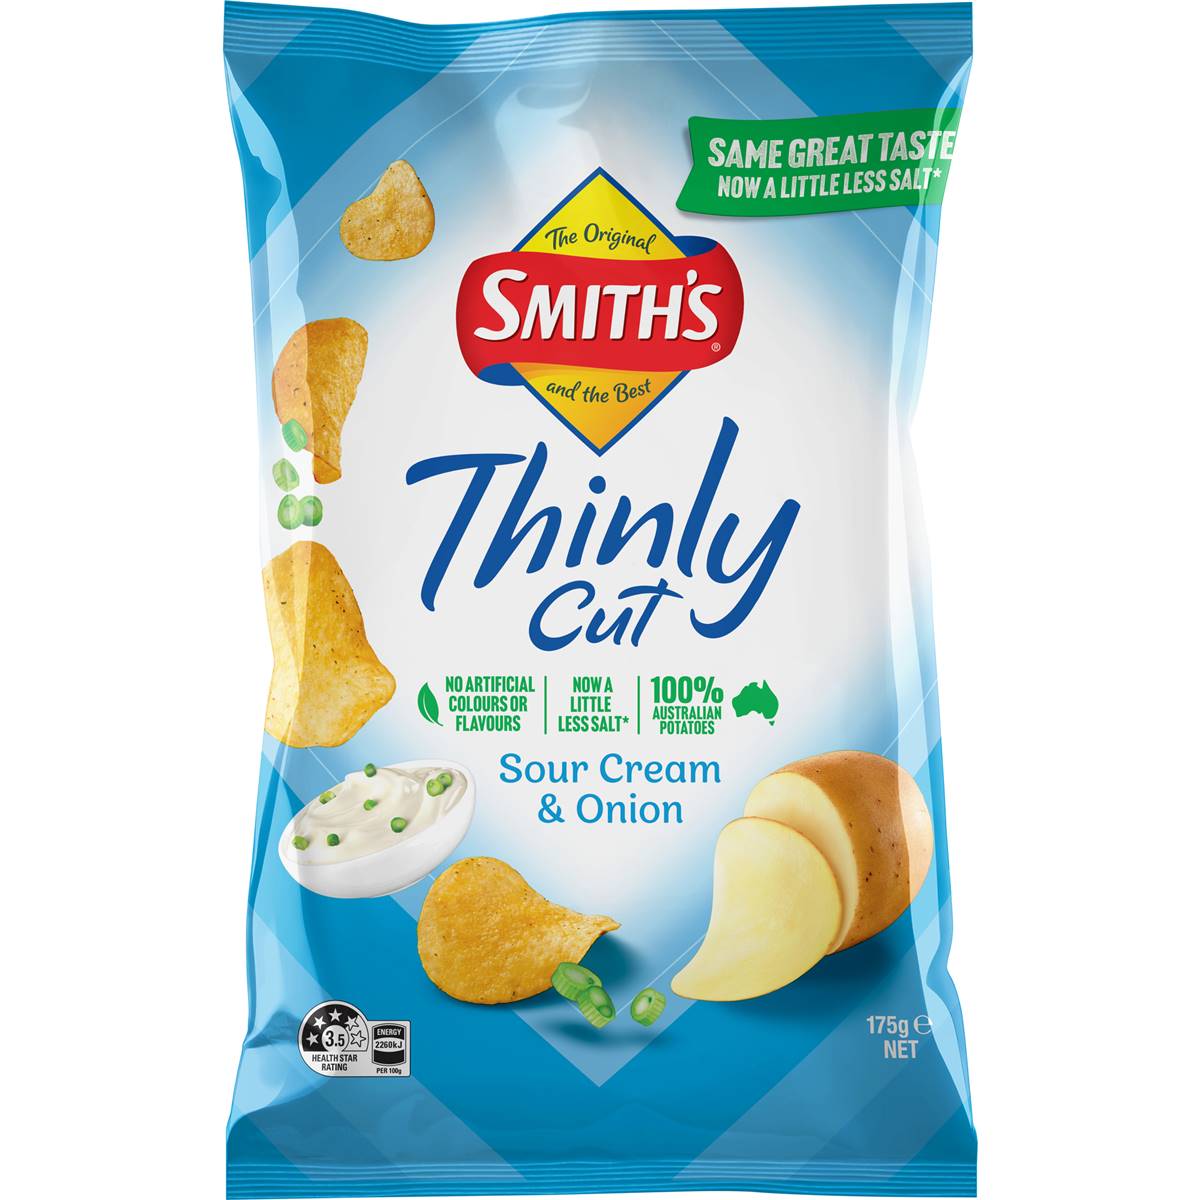 Calories in Smith's Thinly Cut Potato Chips Sour Cream & Onion Share Pack